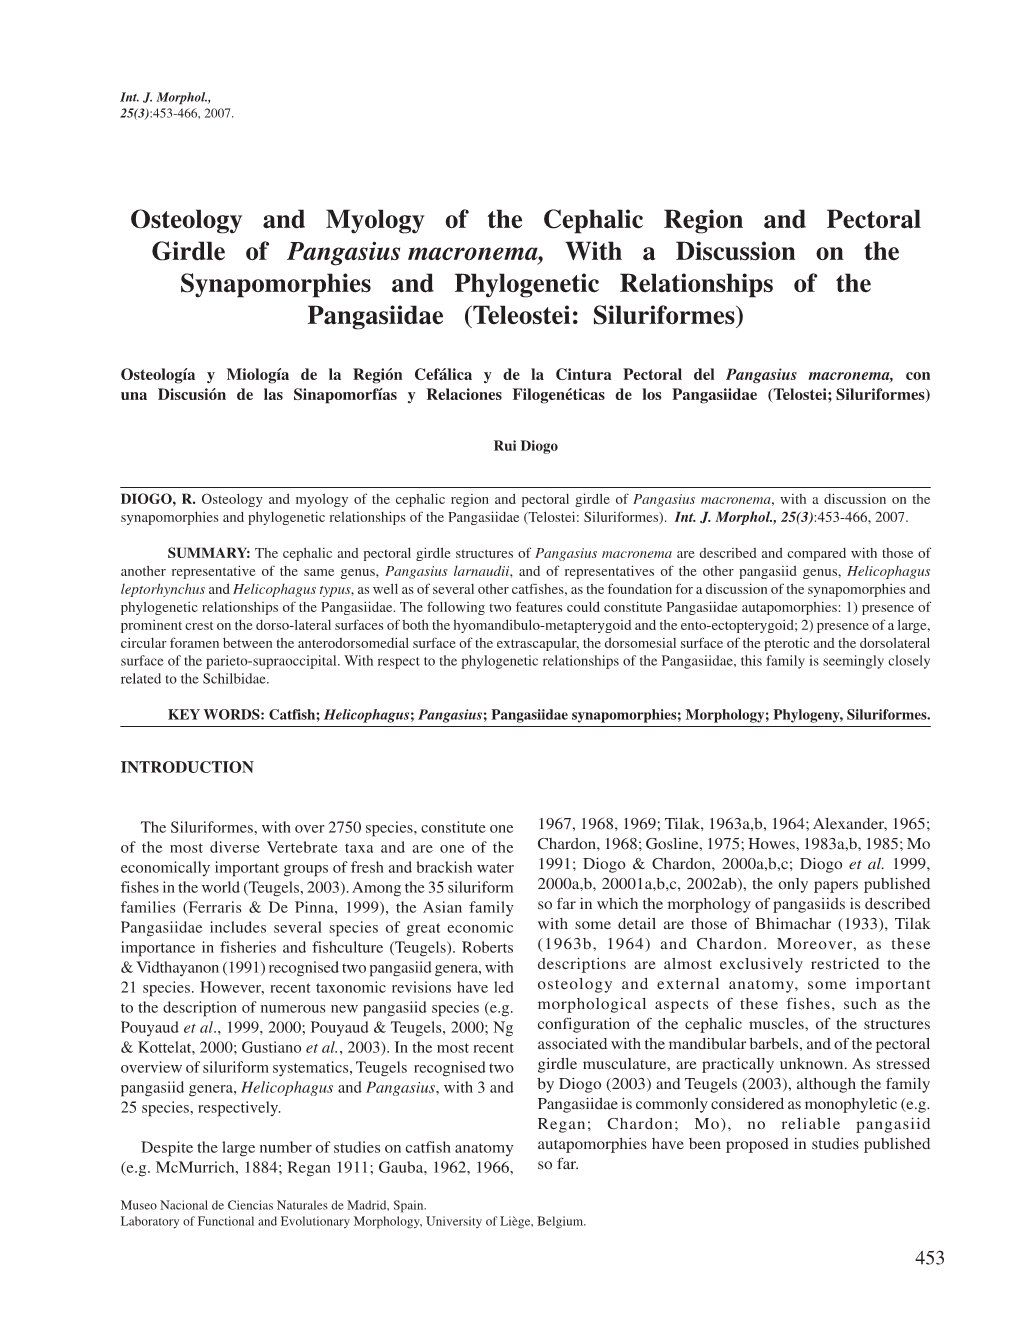 Osteology and Myology of the Cephalic Region and Pectoral